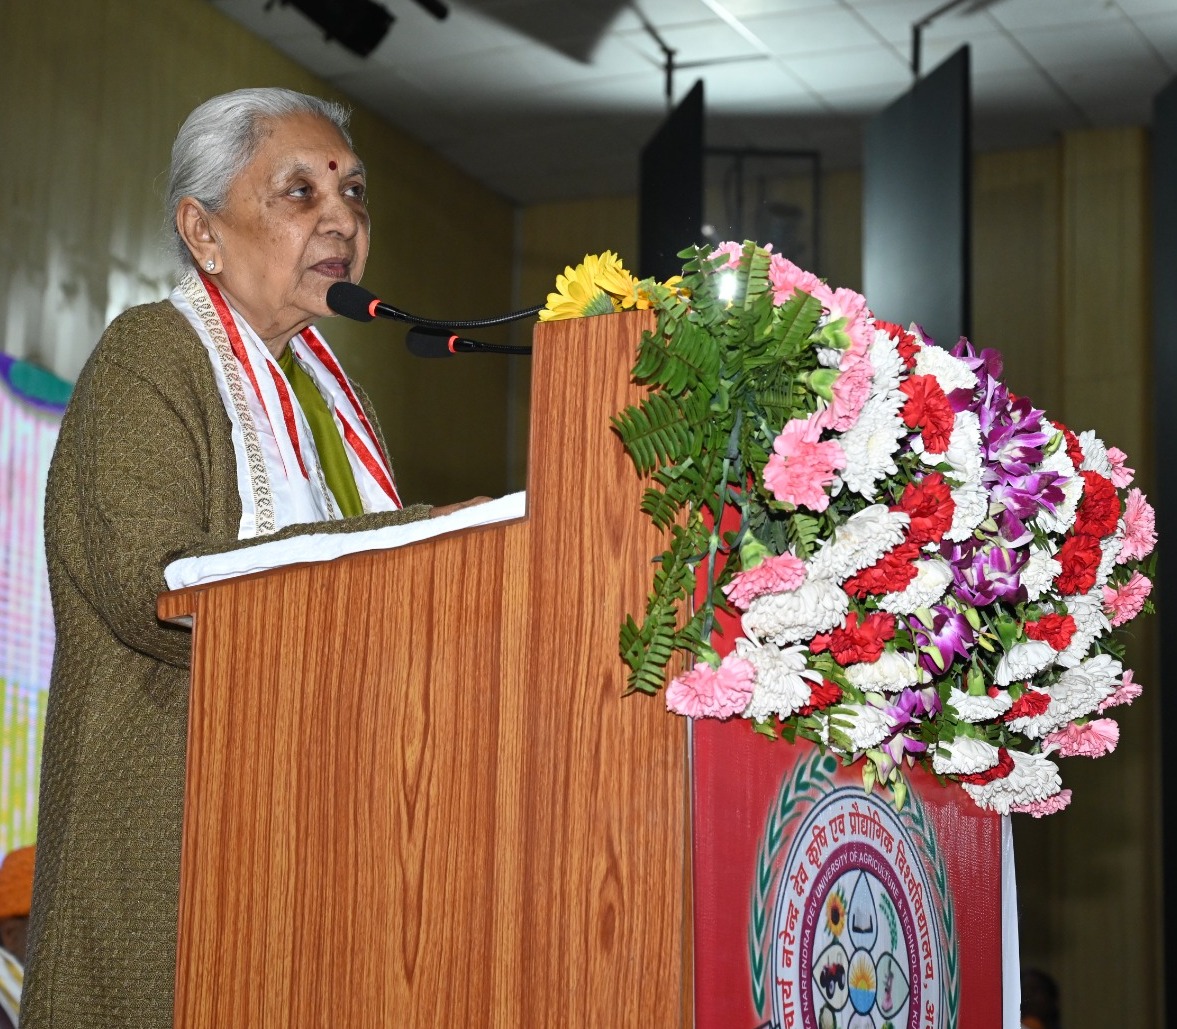 The 25th convocation of Acharya Narendra Dev University of Agriculture and Technology, Kumarganj, Ayodhya was held under the chairmanship of the Governor.